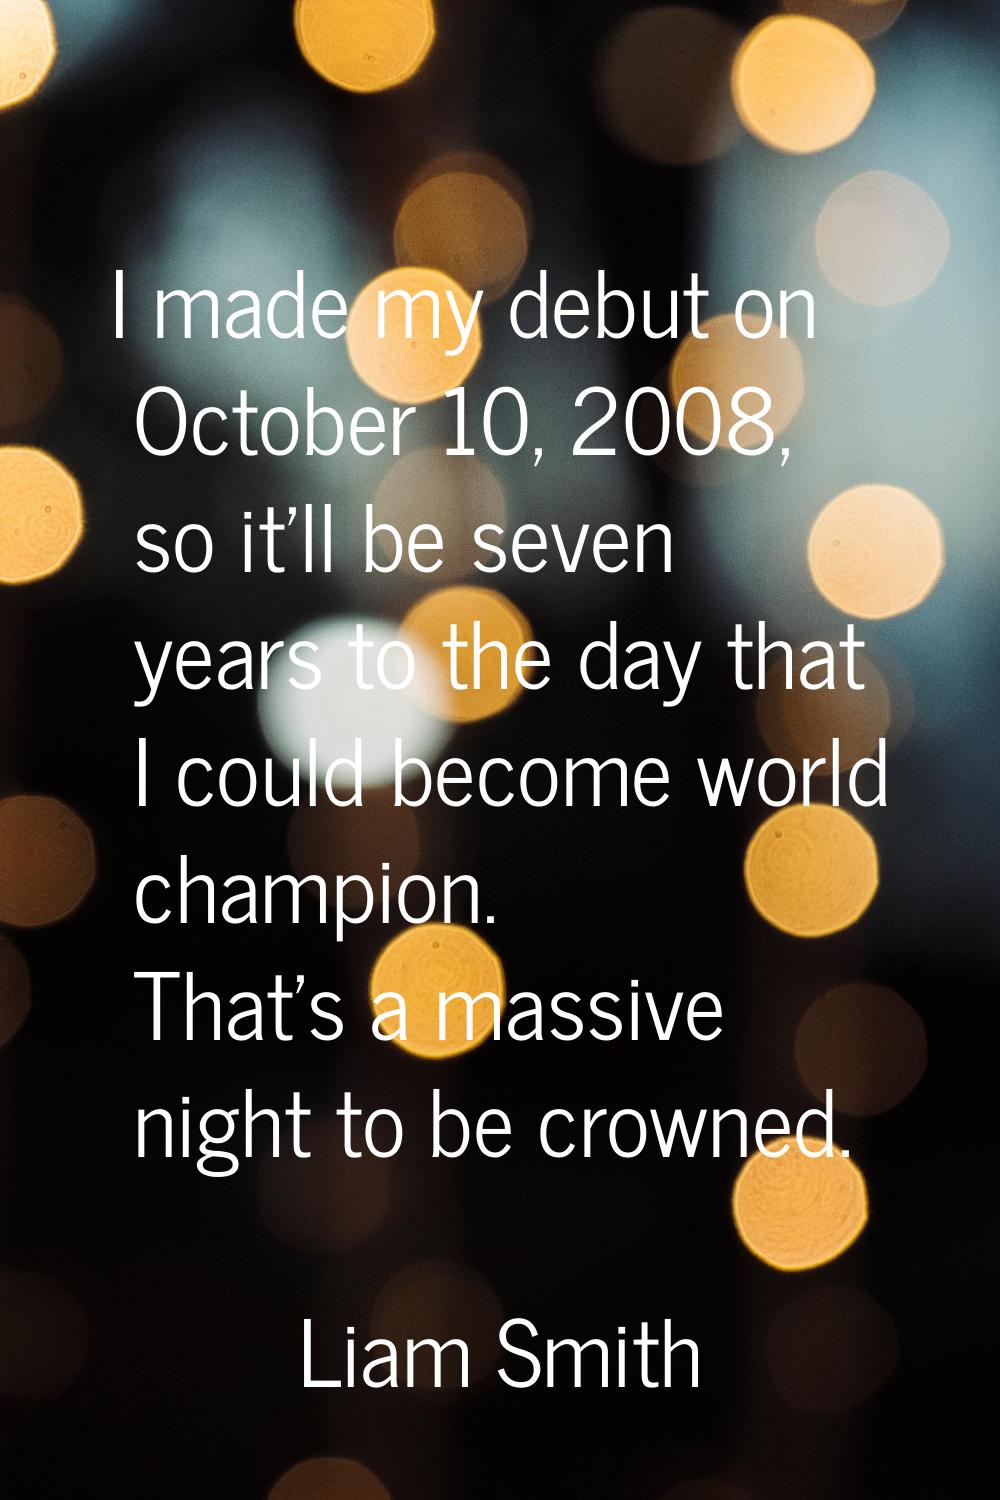 I made my debut on October 10, 2008, so it'll be seven years to the day that I could become world c